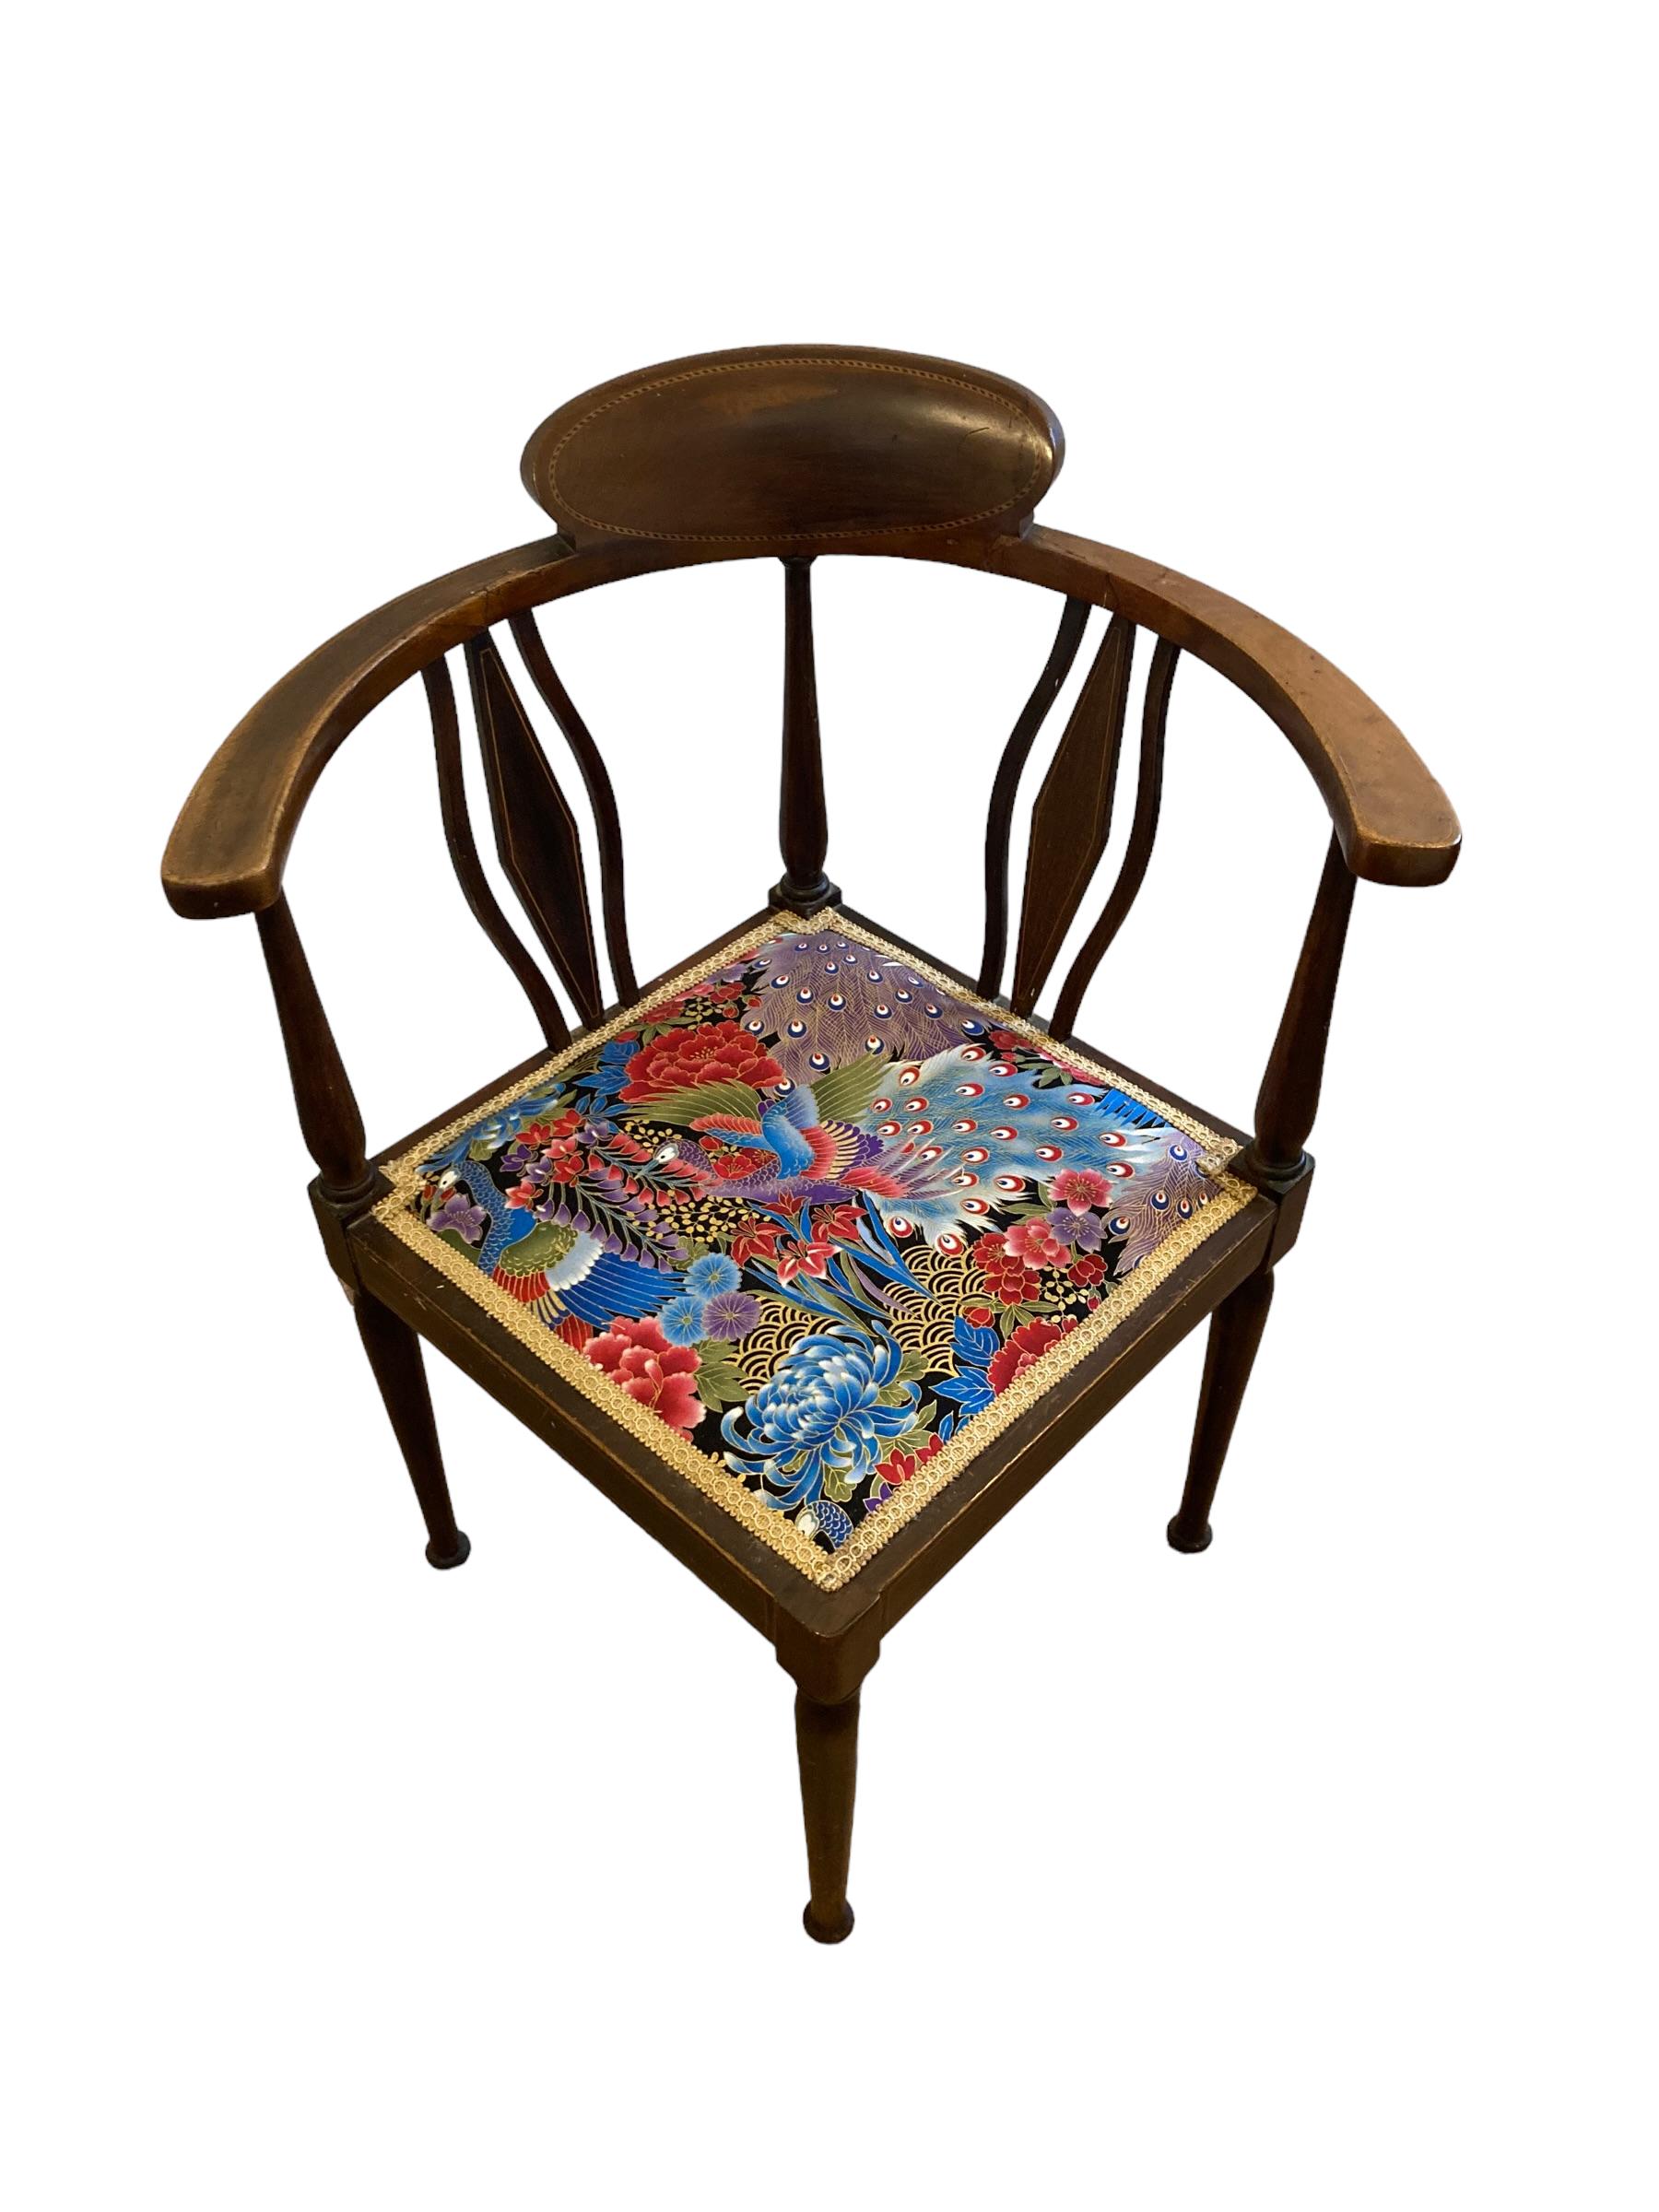 Edwardian Inlaid Corner Chair 1900's For Sale 1